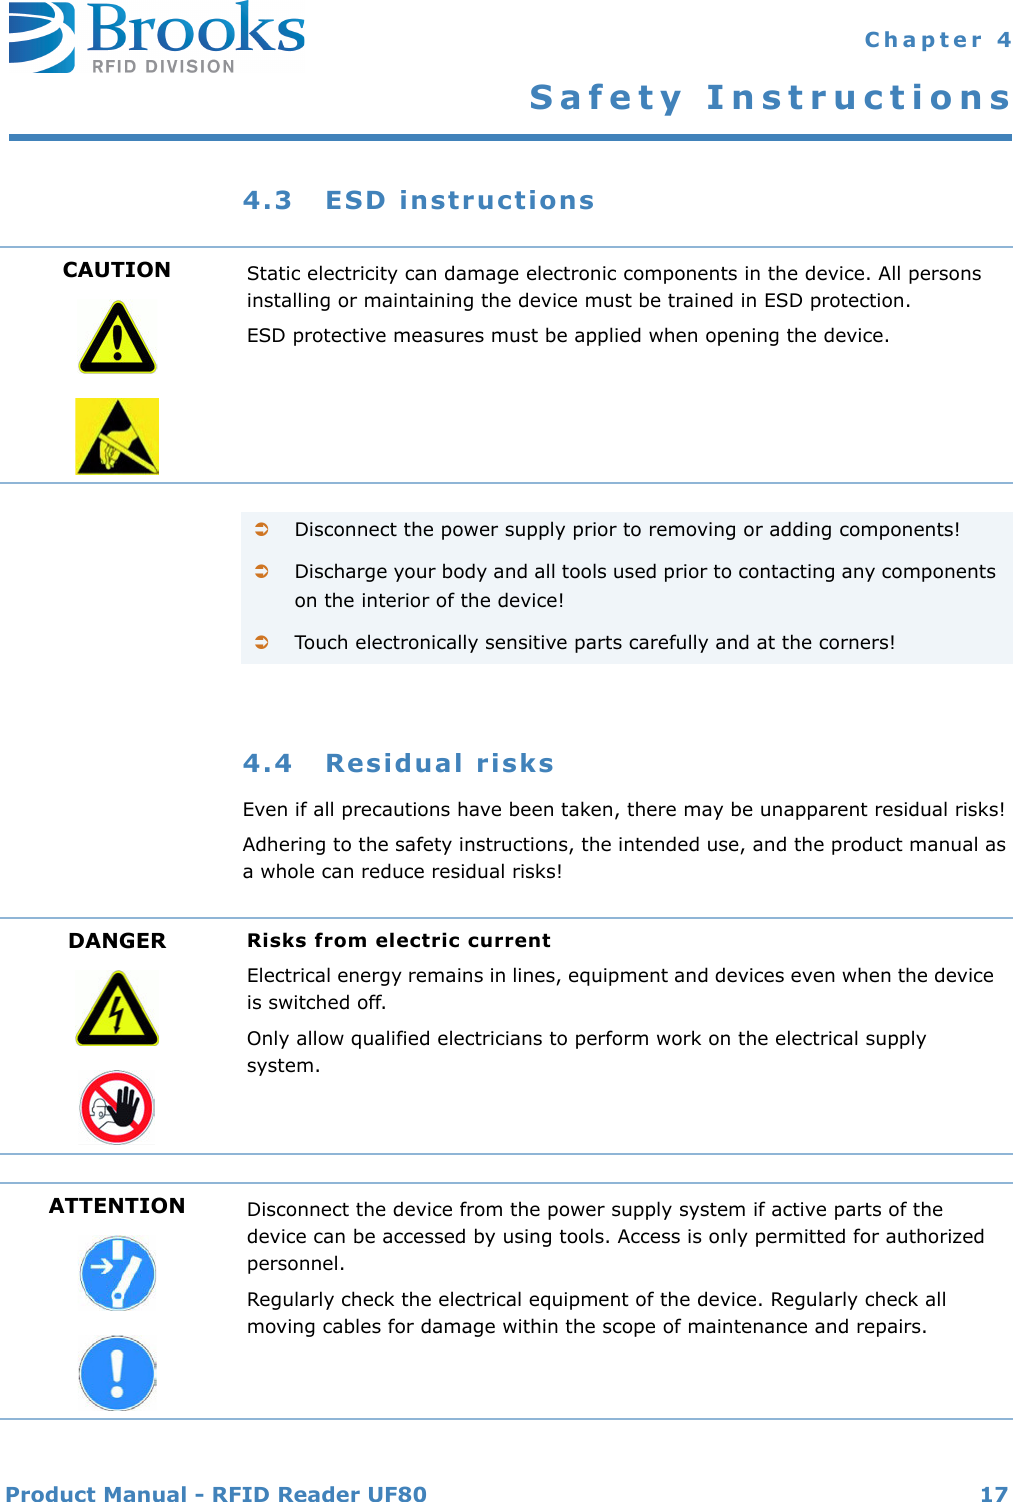 Product Manual - RFID Reader UF80 17 Chapter 4Safety Instructions4.3 ESD instructions4.4 Residual risksEven if all precautions have been taken, there may be unapparent residual risks!Adhering to the safety instructions, the intended use, and the product manual as a whole can reduce residual risks!CAUTION Static electricity can damage electronic components in the device. All persons installing or maintaining the device must be trained in ESD protection.ESD protective measures must be applied when opening the device.Disconnect the power supply prior to removing or adding components!Discharge your body and all tools used prior to contacting any components on the interior of the device!Touch electronically sensitive parts carefully and at the corners!DANGER Risks from electric currentElectrical energy remains in lines, equipment and devices even when the device is switched off.Only allow qualified electricians to perform work on the electrical supply system.ATTENTION Disconnect the device from the power supply system if active parts of the device can be accessed by using tools. Access is only permitted for authorized personnel.Regularly check the electrical equipment of the device. Regularly check all moving cables for damage within the scope of maintenance and repairs.